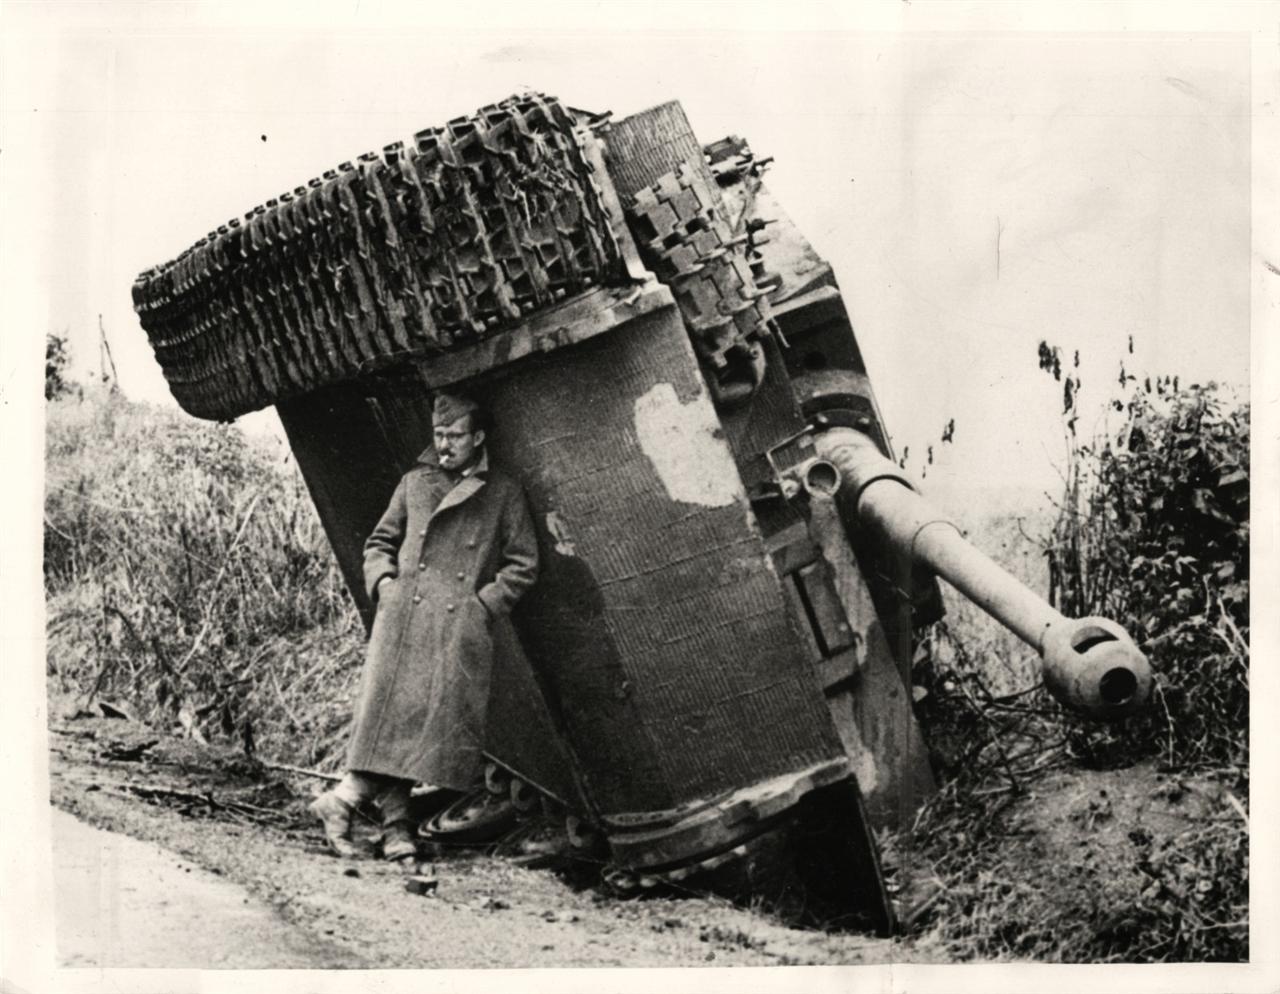 British soldier protecting himself from the rain under turned over tank, Italy, 1944.jpg